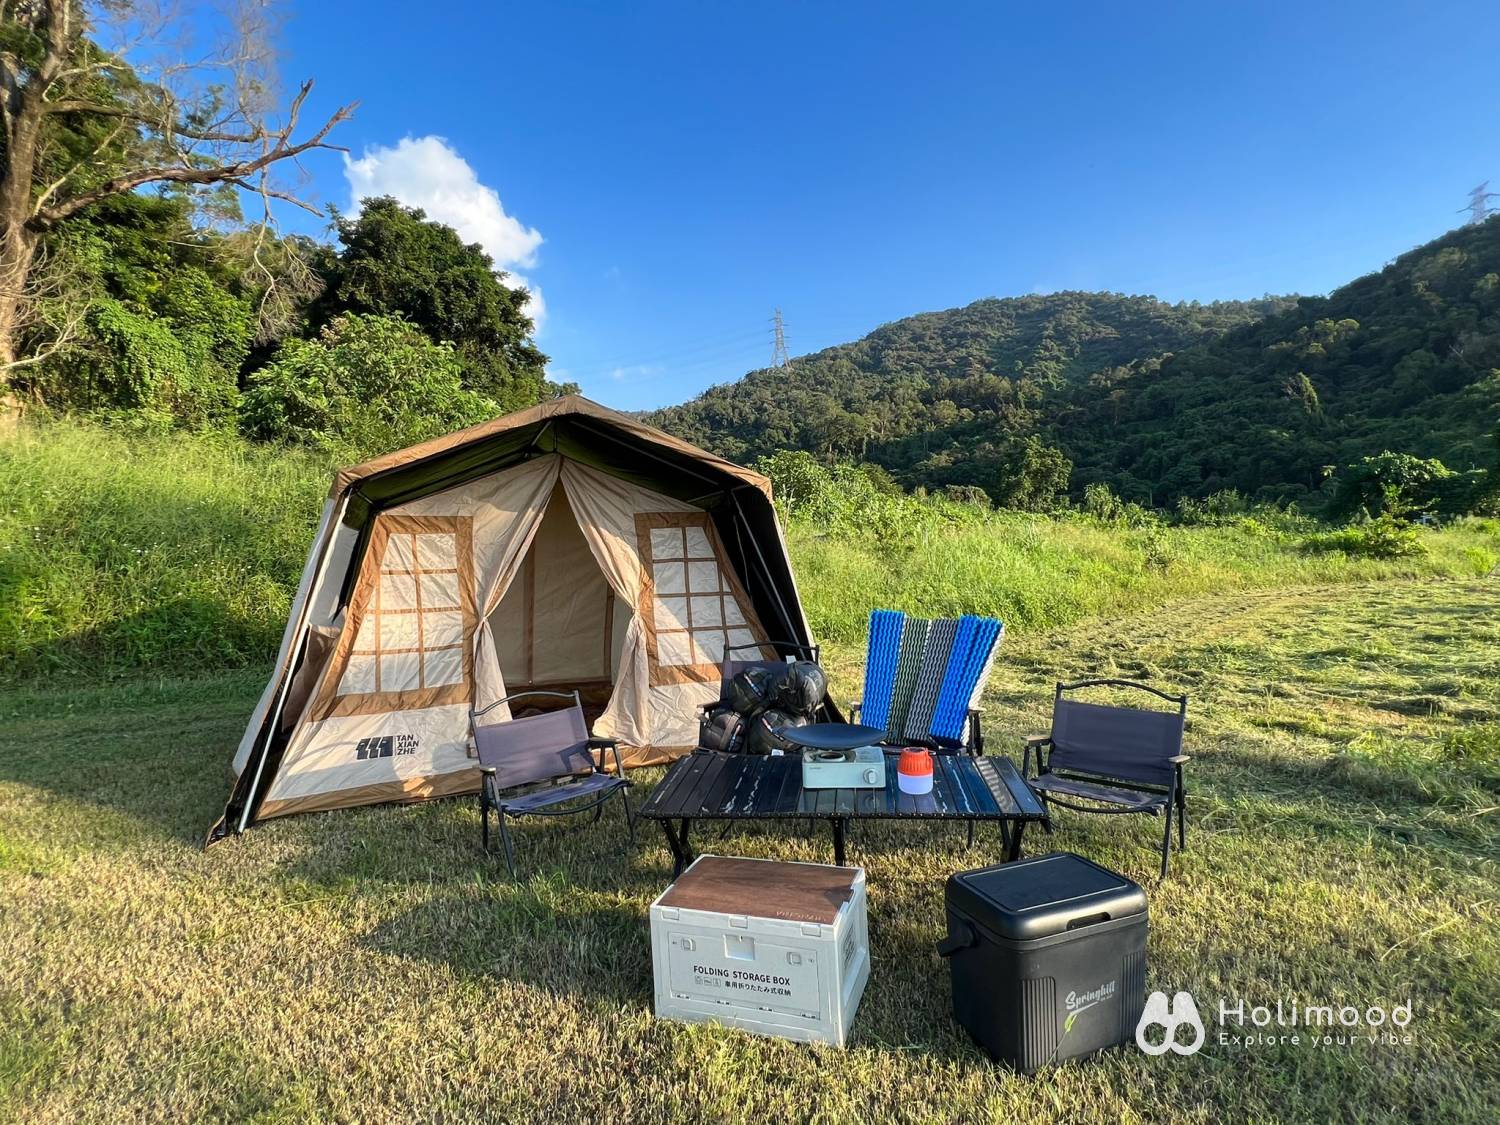 Nomad Terrace - Dome & Bell Tent & Glamping Tent 【罕有梯田露營區Zone C】2-4人和風小山屋露營(連精緻露營用具) 1